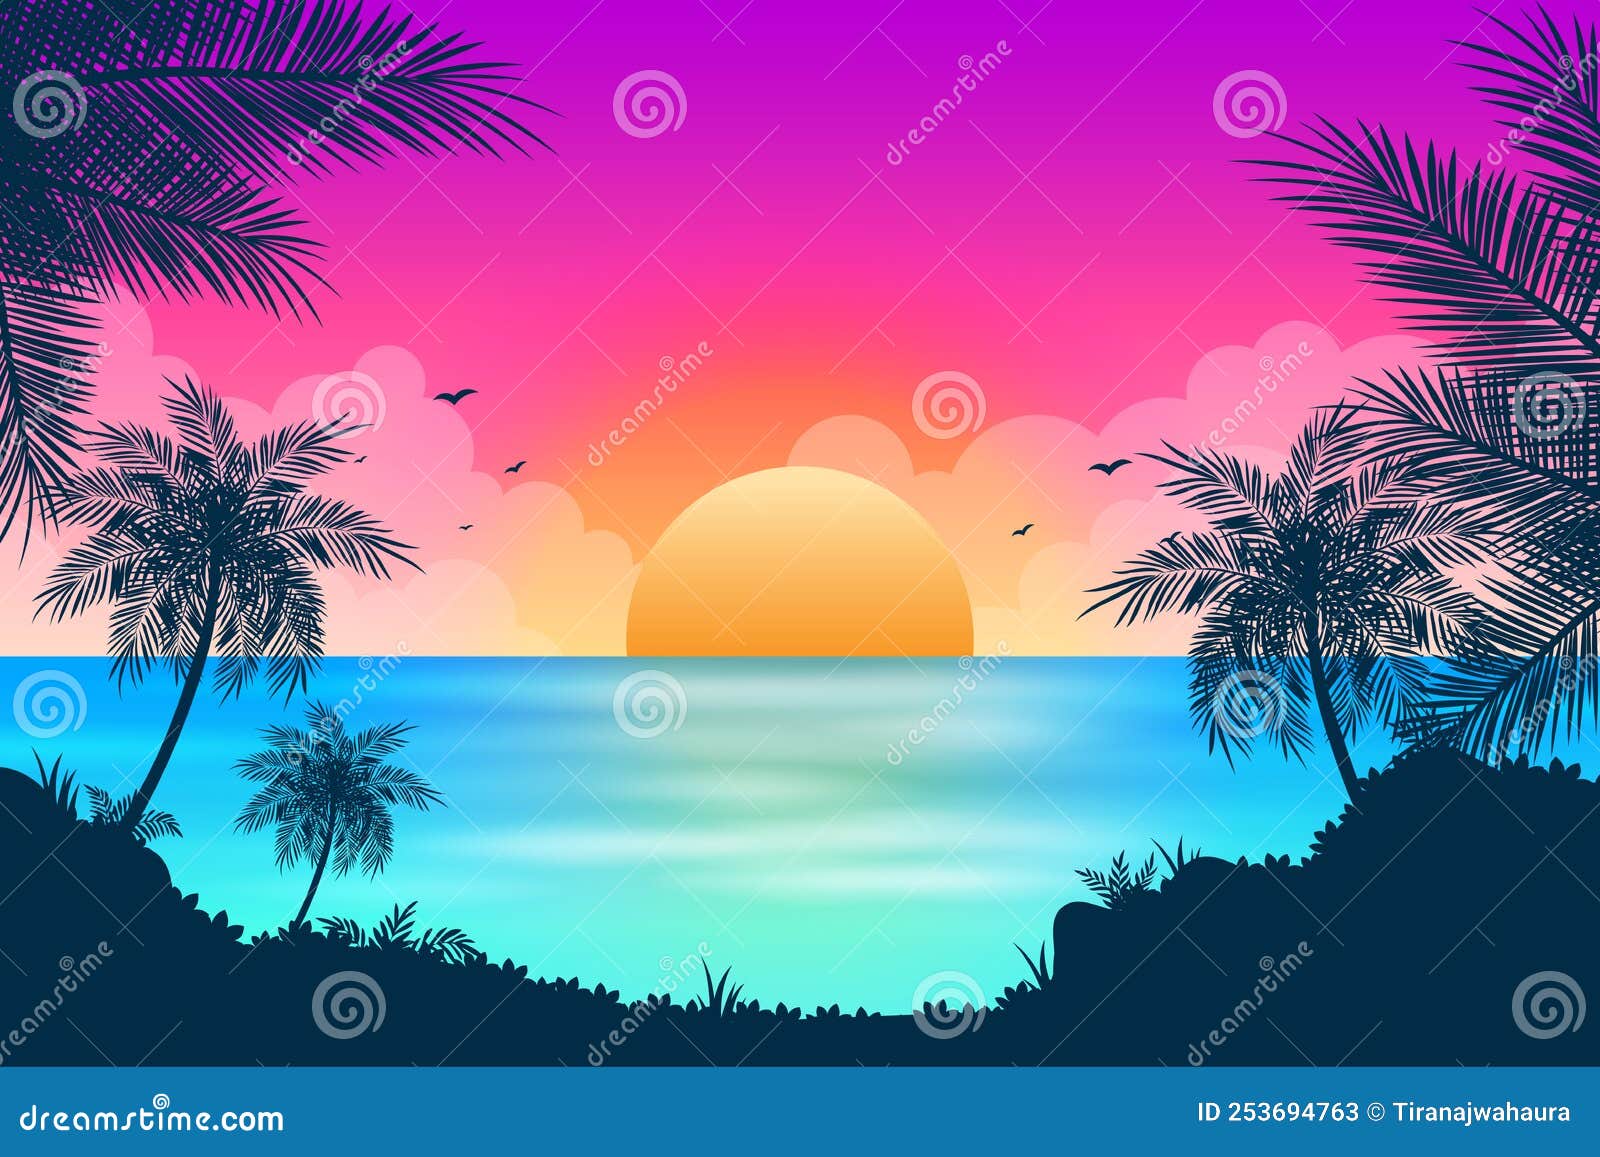 Sunset Beach Landscape with Colorful Gradient Design Stock Vector ...